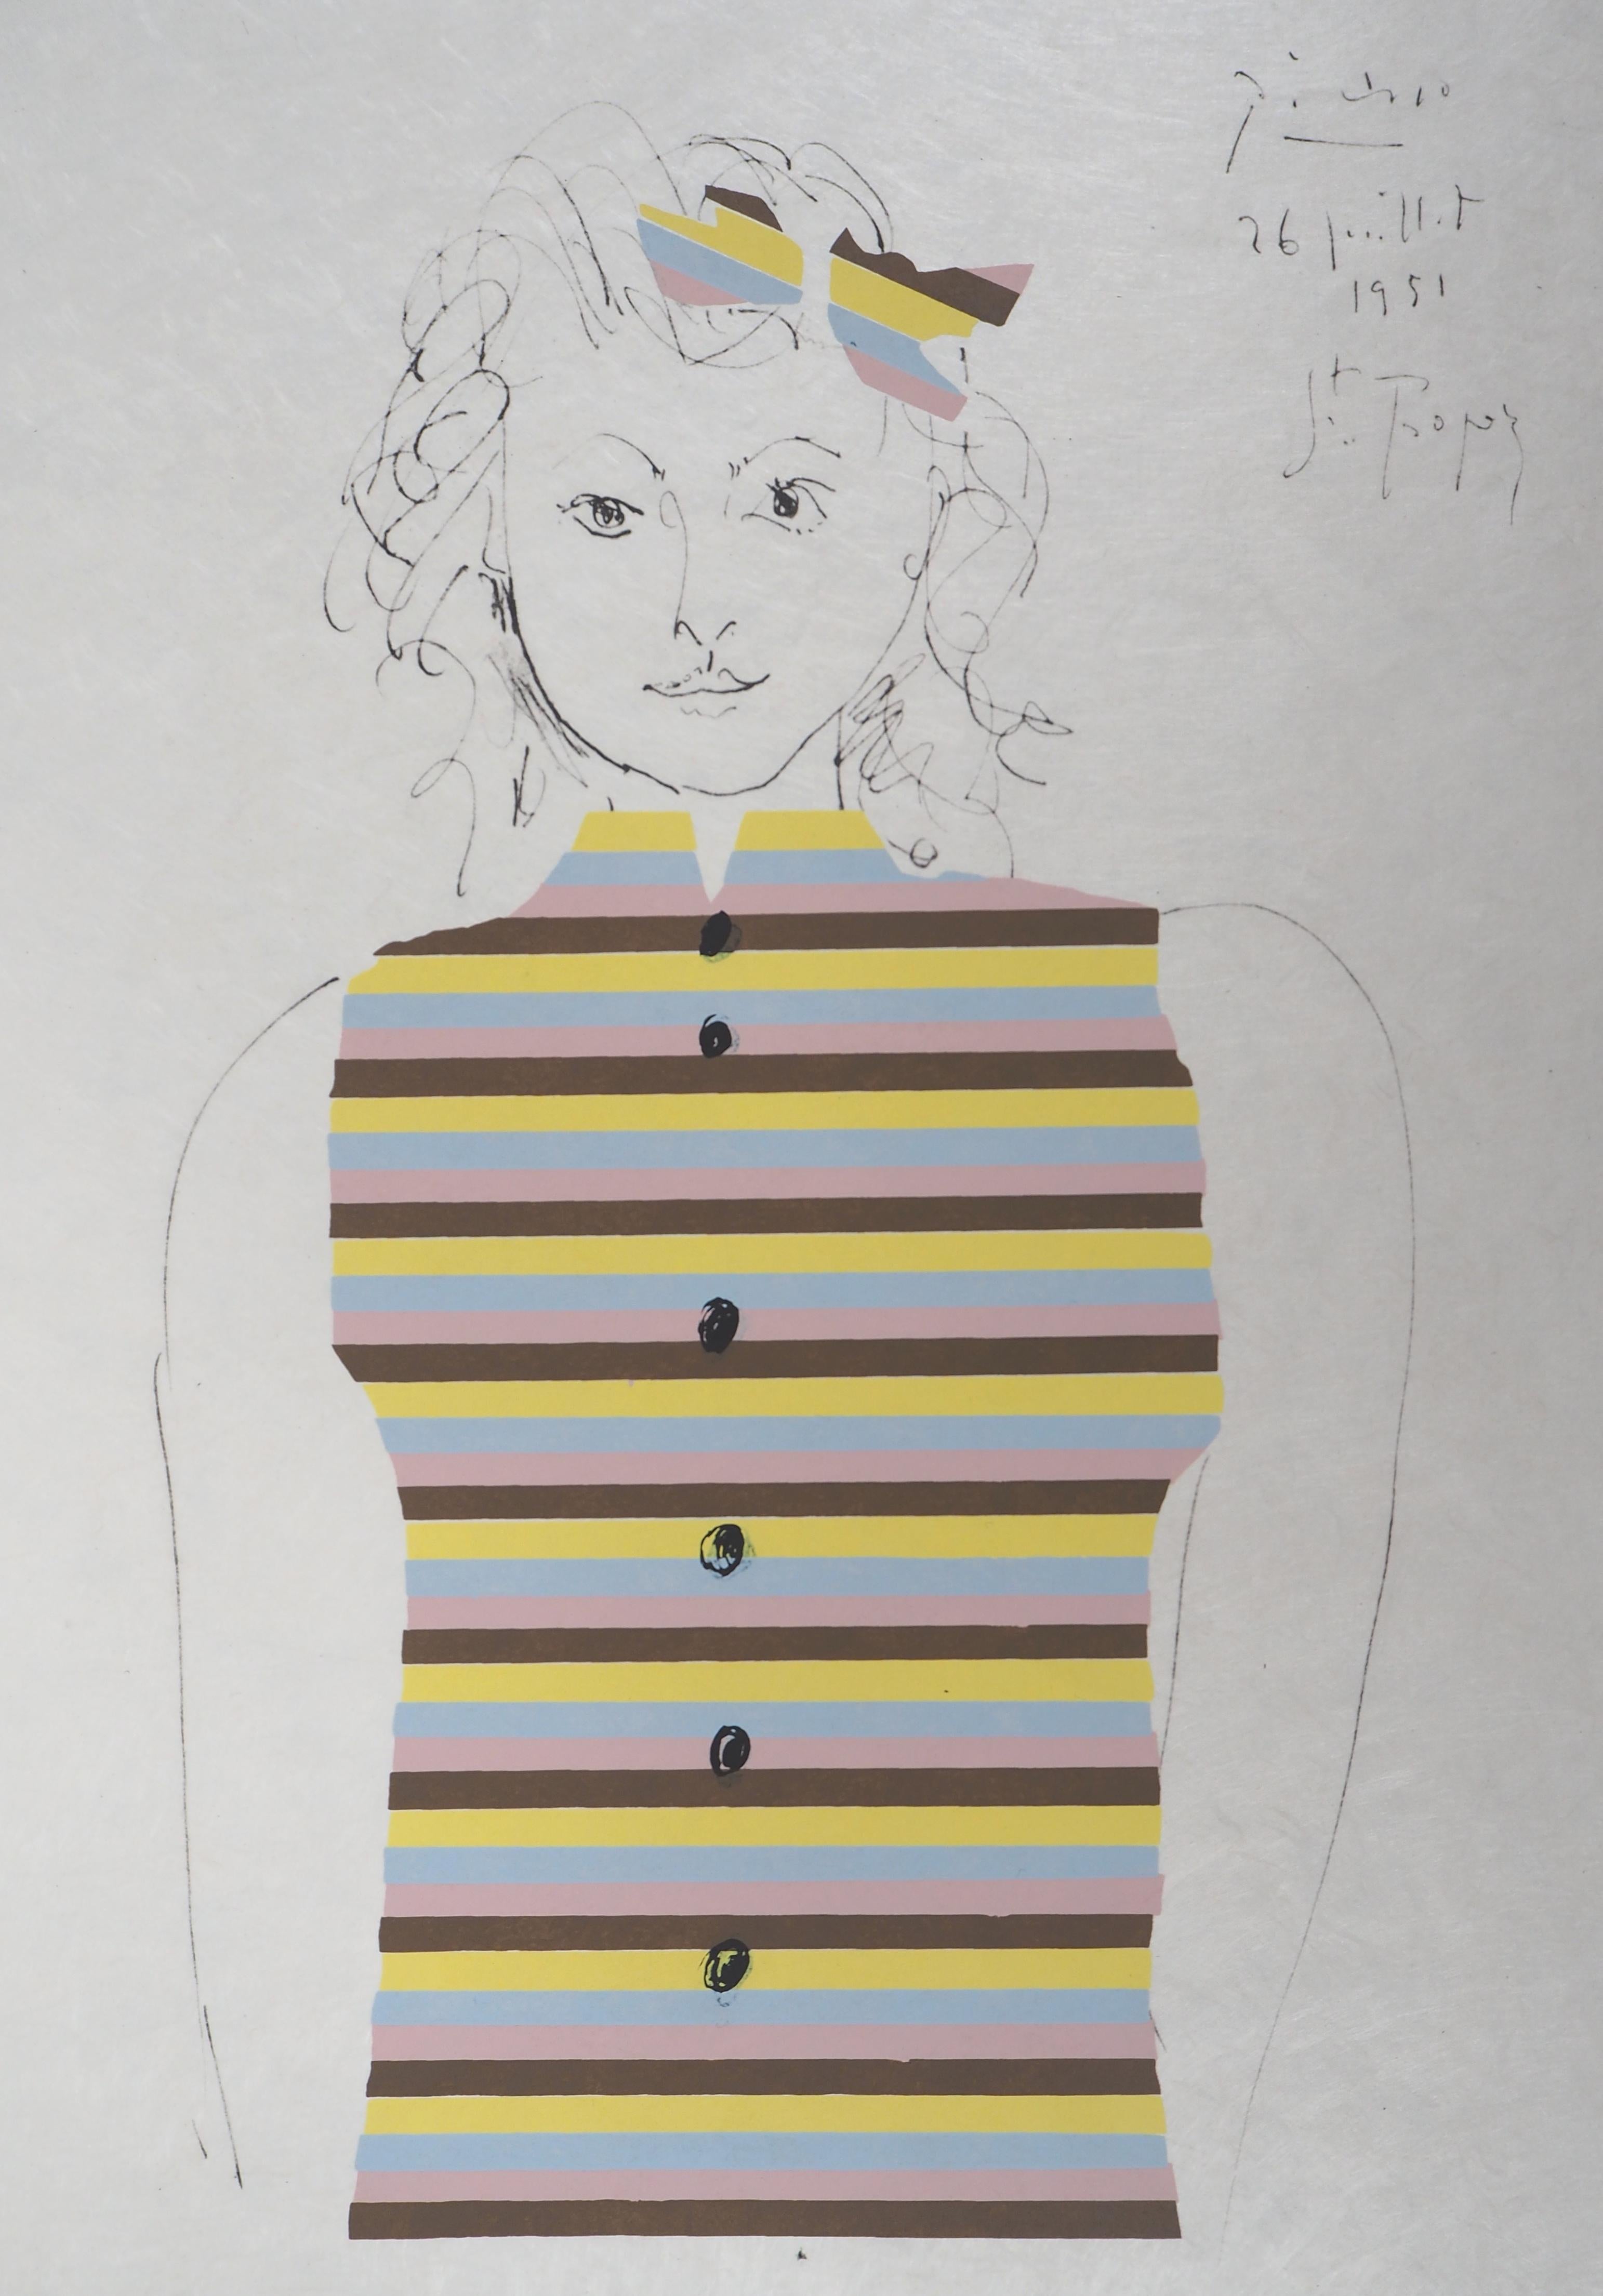 (after) Pablo Picasso Portrait Print - Young Girl With Stripes Sweater - Lithograph on Japan paper - Ltd to 100 proofs